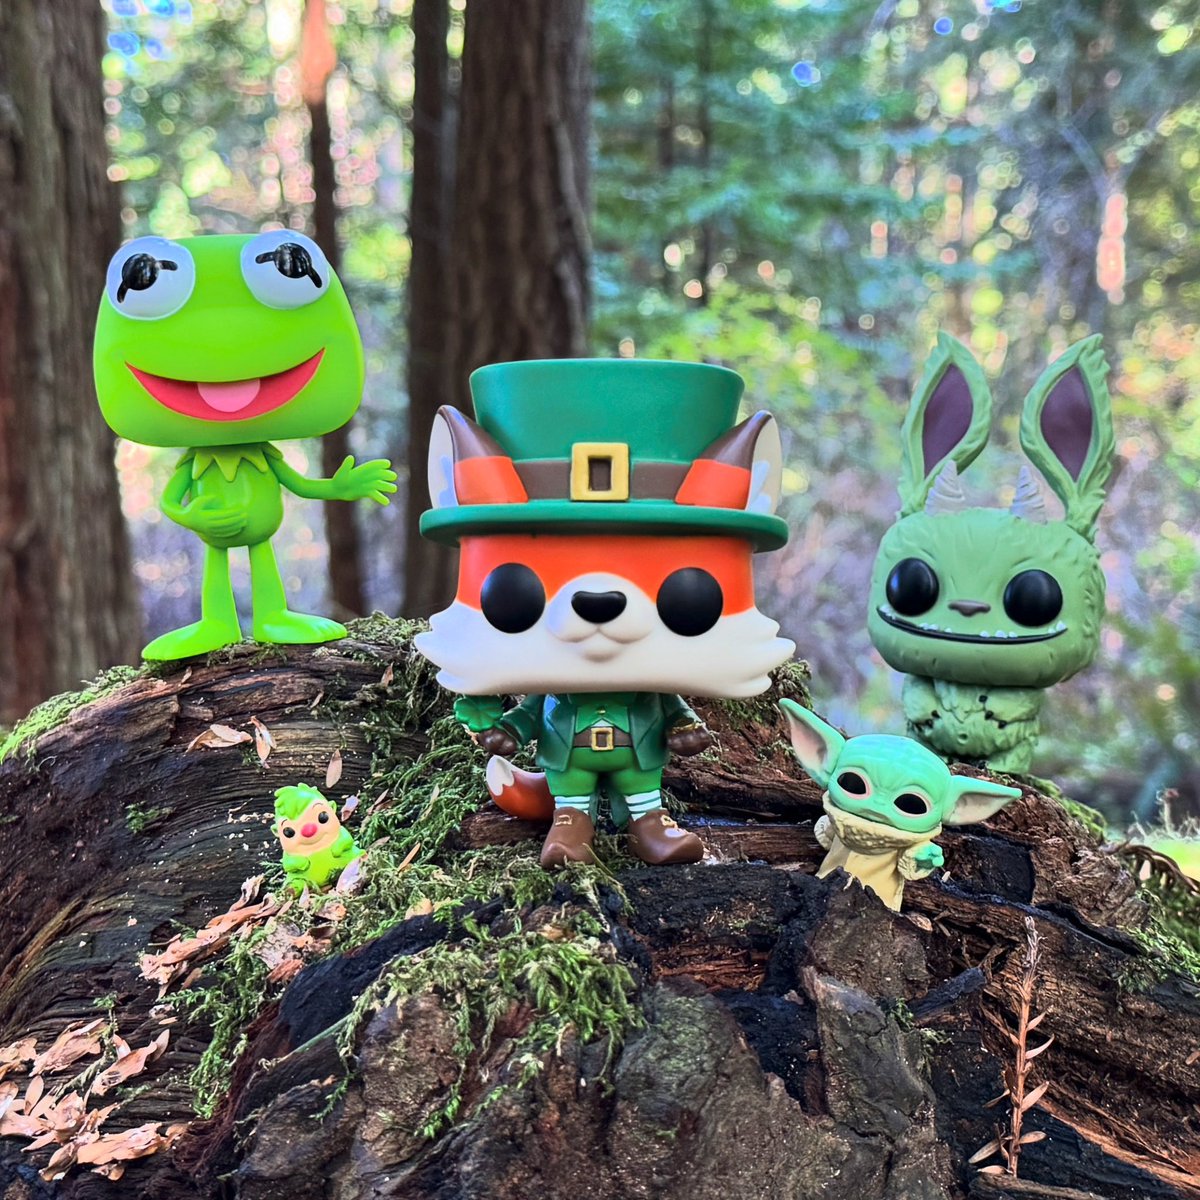 The Green Team! Finley Leads The Way For A Celebration! Funko March Photo A Day! The Theme For Today is St. Patrick’s Day! ☘️ #PopAroundTheWorld #KermitTheFrog #WetmoreForest #Funko #FunkoPop @originalfunko #FunkoPhotoADayChallenge #StPatricksDay #SpringIntoFunko #FunkoPhotoADay